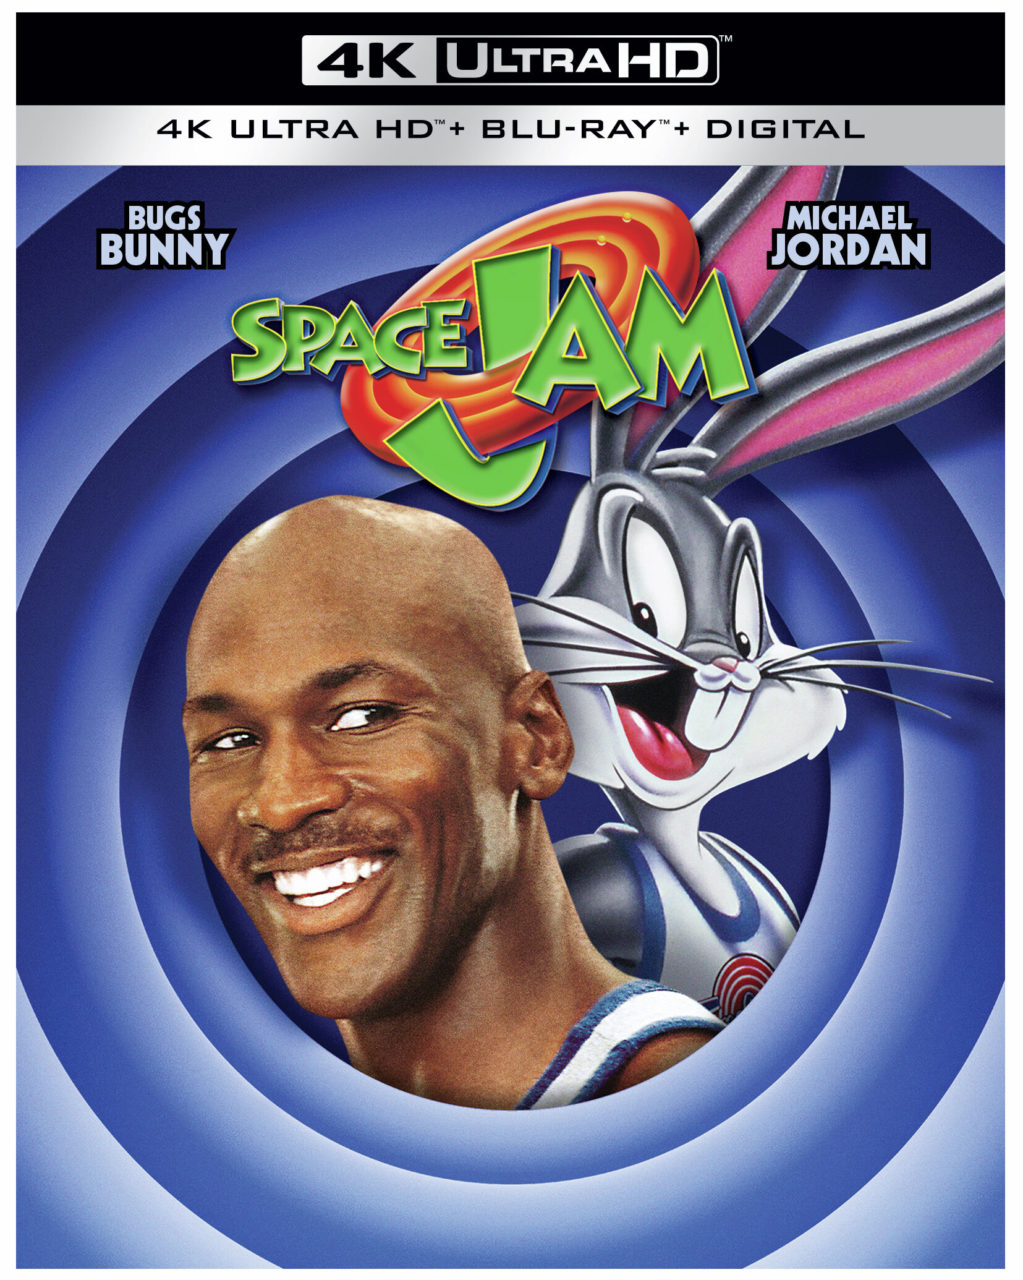 Space Jam 4K Ultra HD Combo Pack cover (Warner Bros. Home Entertainment)